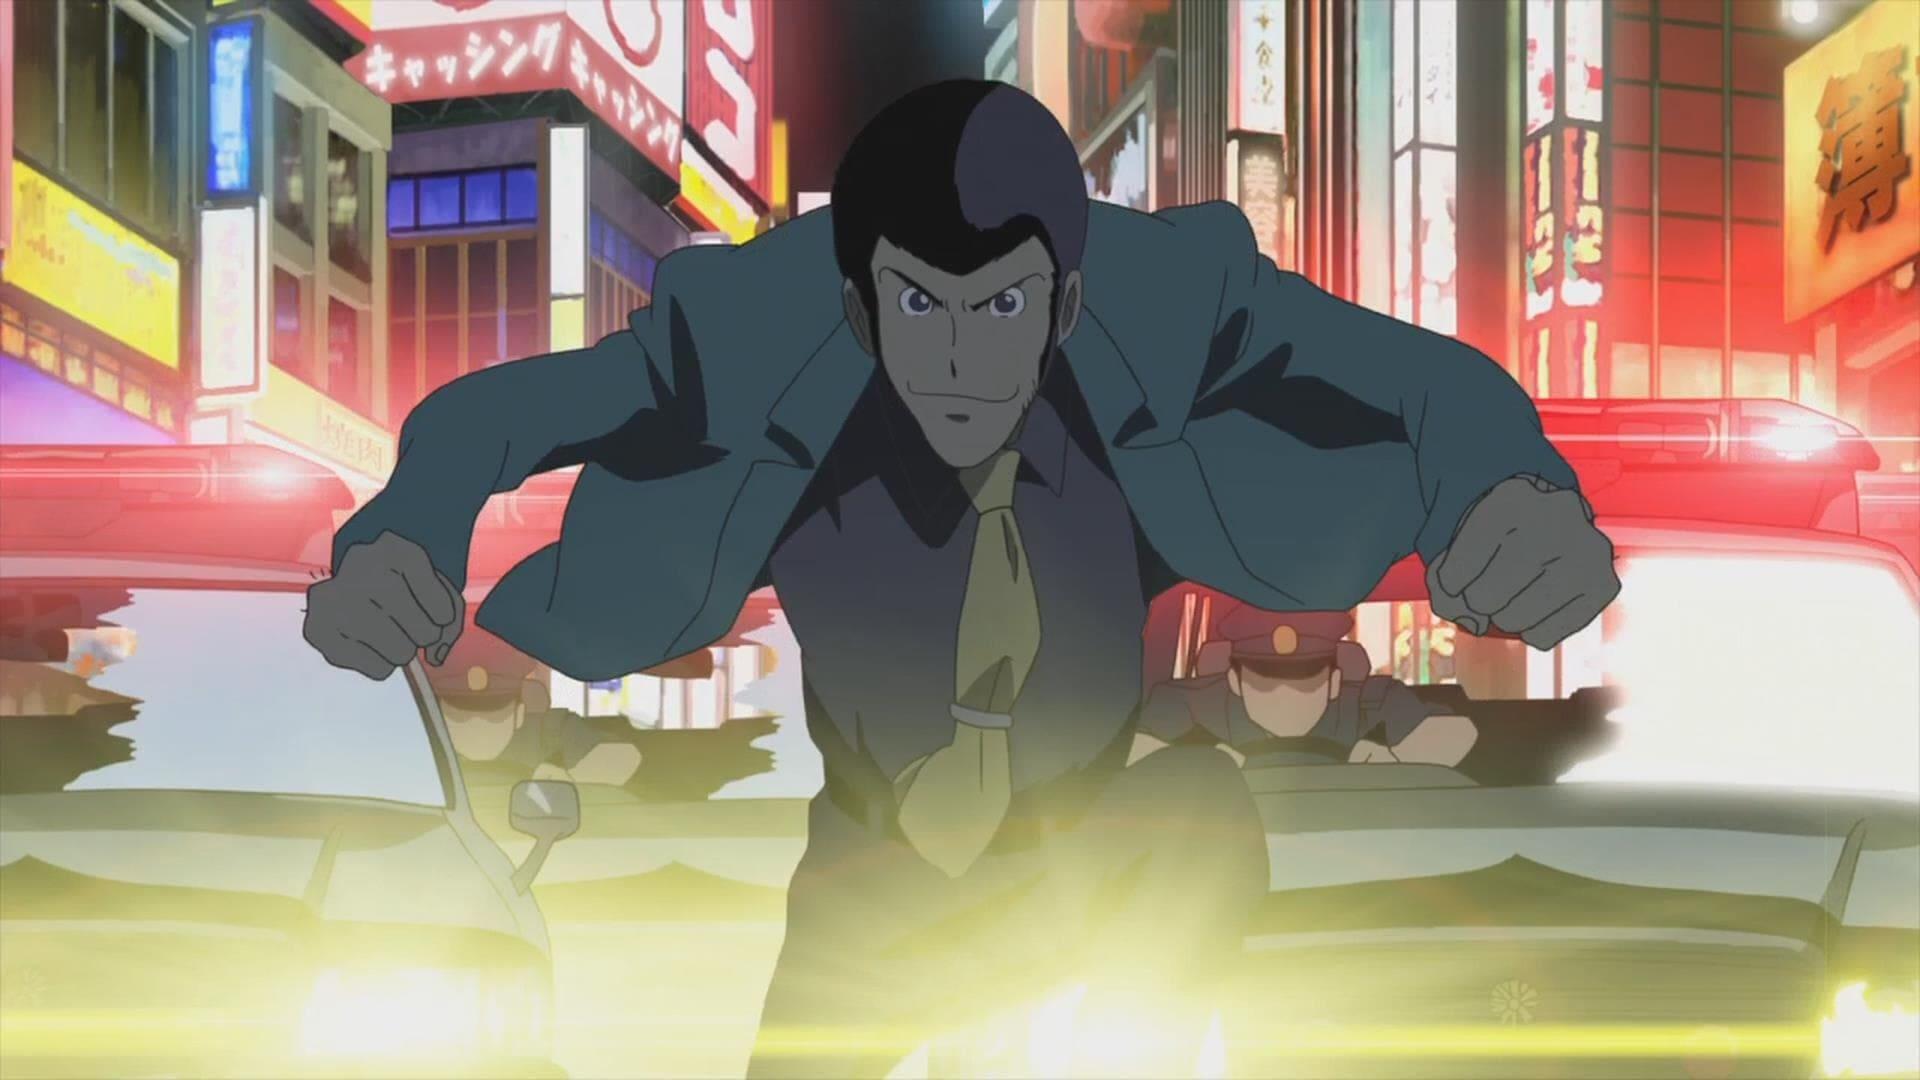 Lupin the Third: Green vs Red backdrop